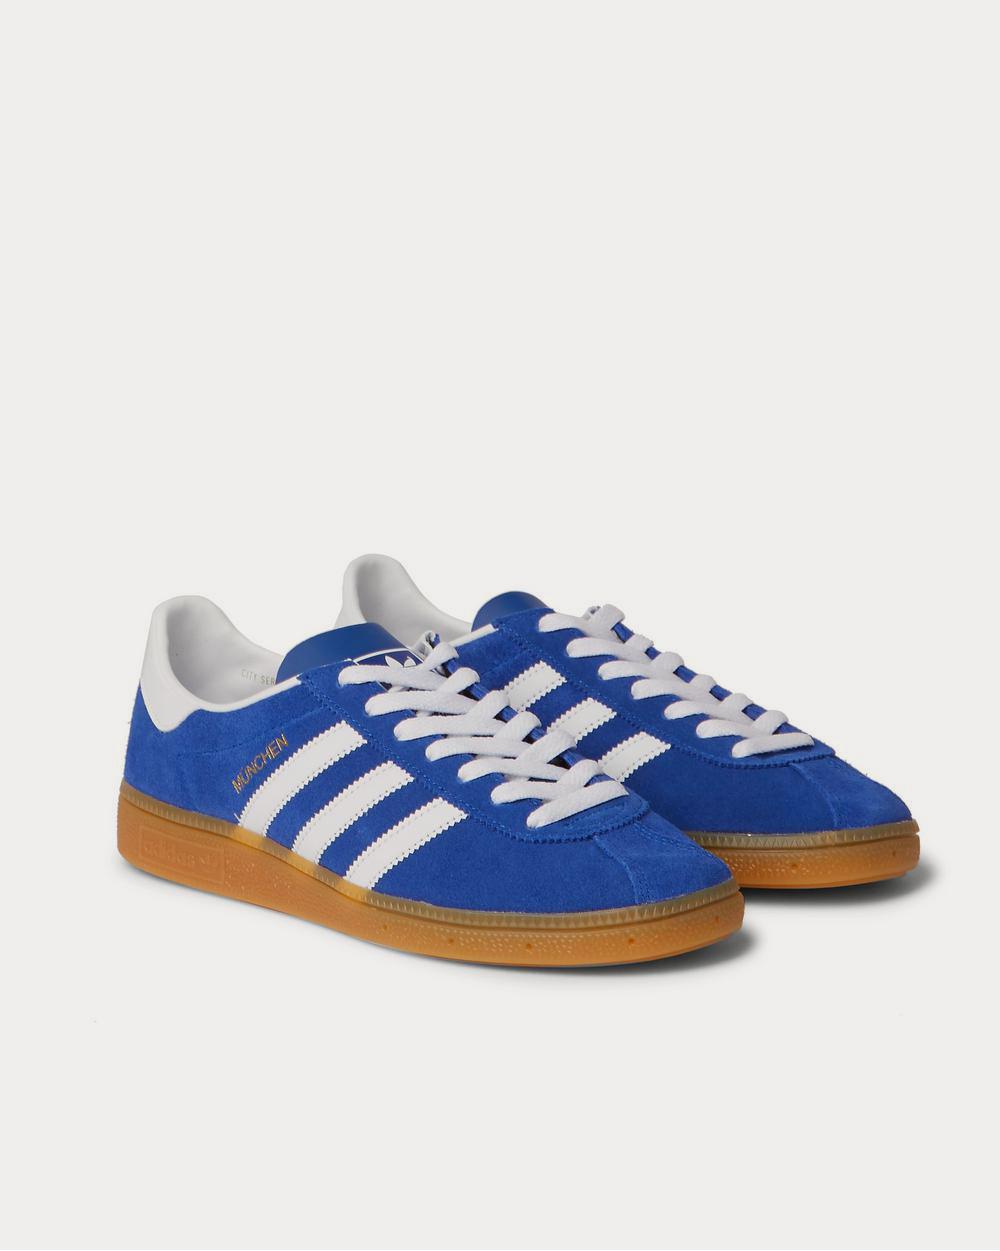 Adidas - München Leather-Trimmed Brushed-Suede  Blue low top sneakers